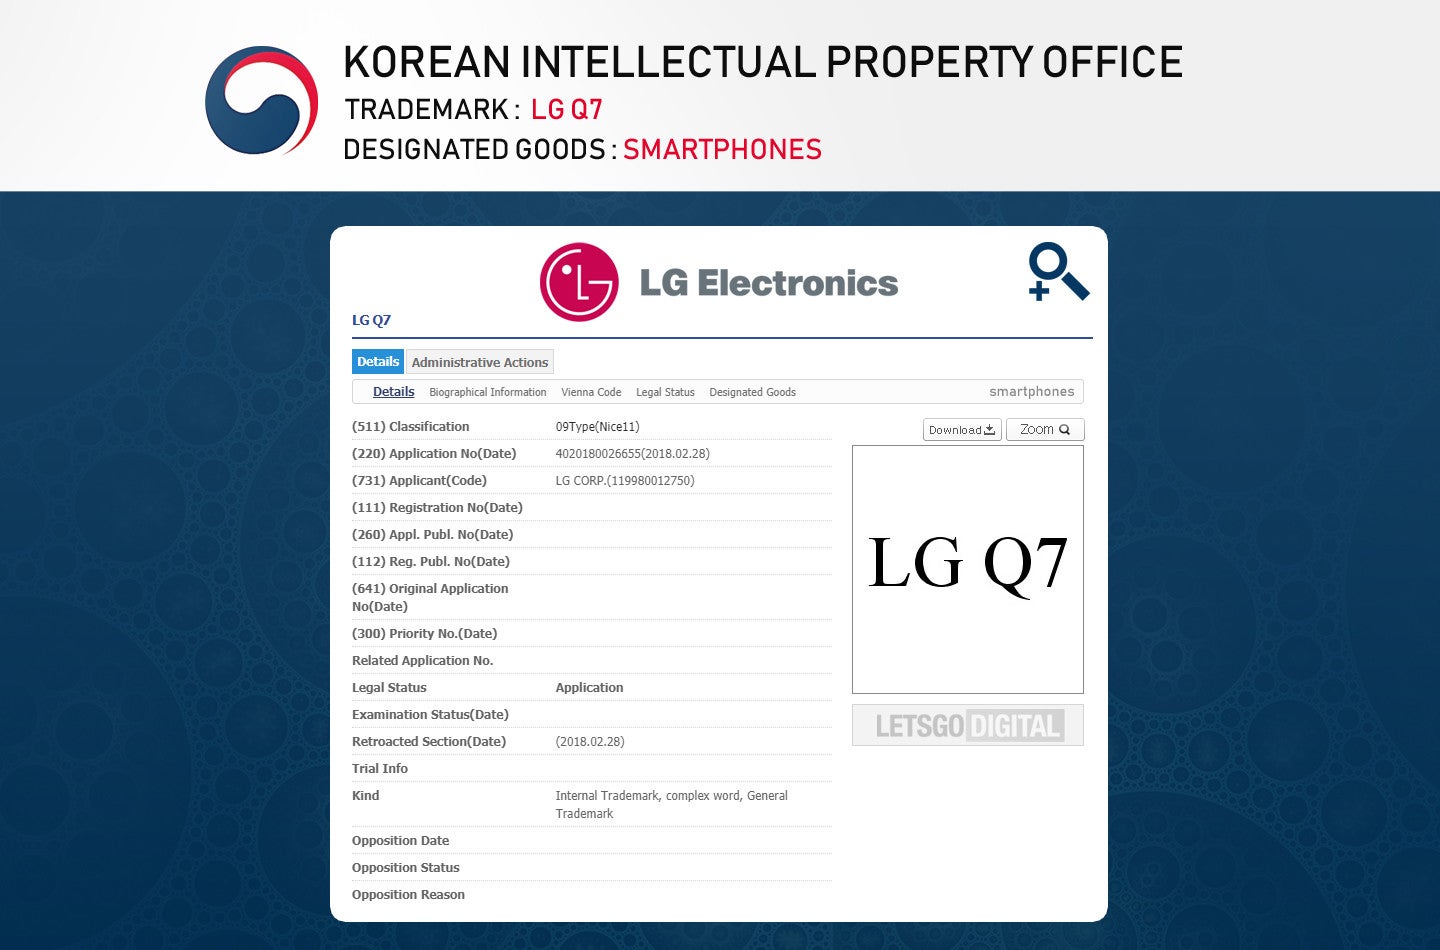 LG Q7 trademark - More evidence suggests LG Q7 may be launched alongside the G7 flagship